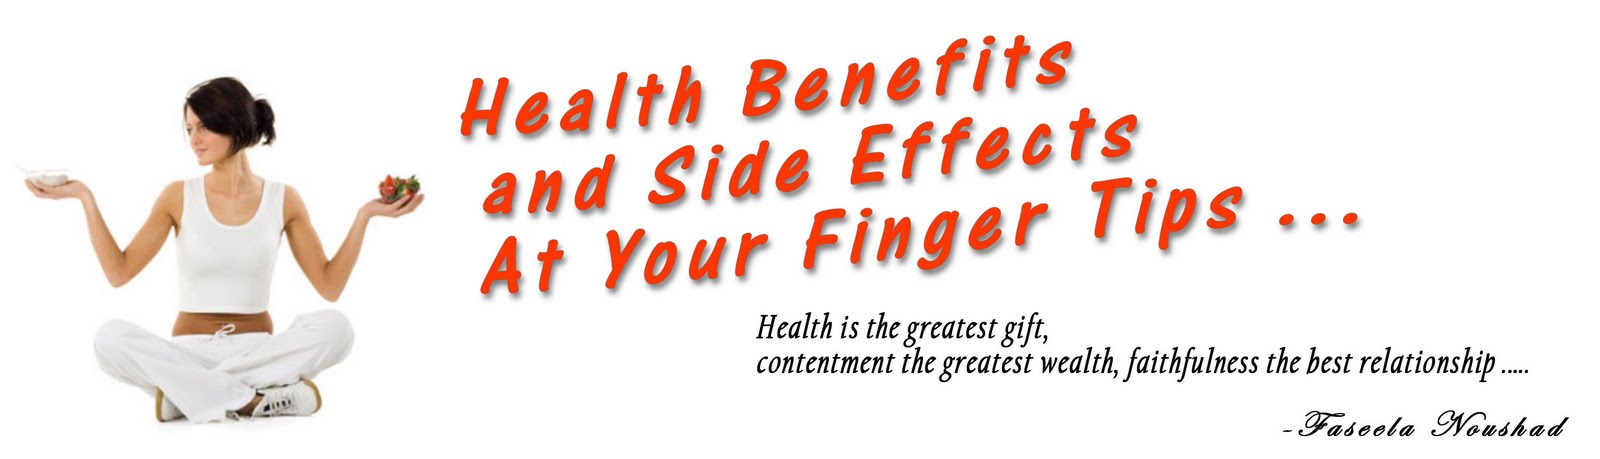 Health Benefits and Side Effects At Your Finger Tips